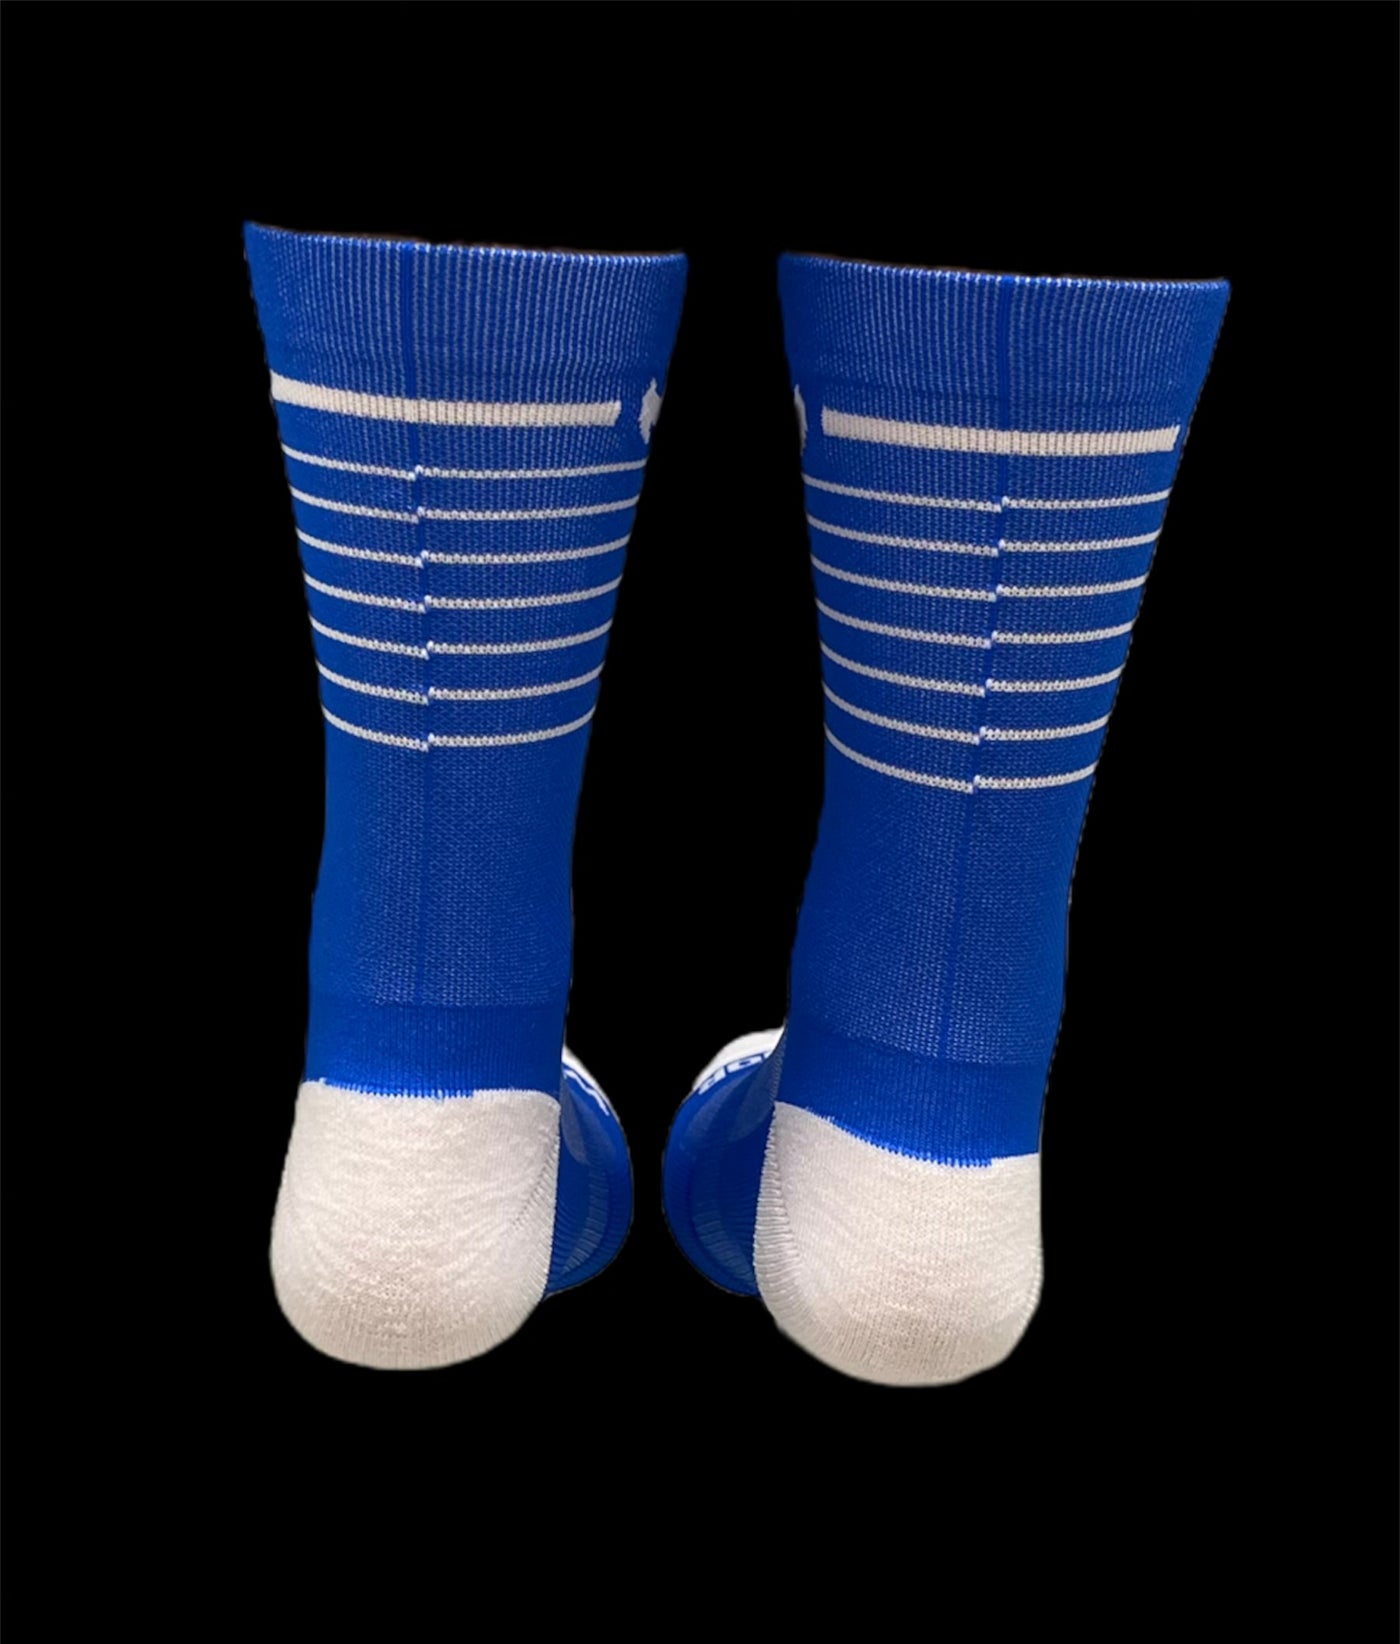 Classic blue and white striped 6" Men's and Women's cycling sock with compression.